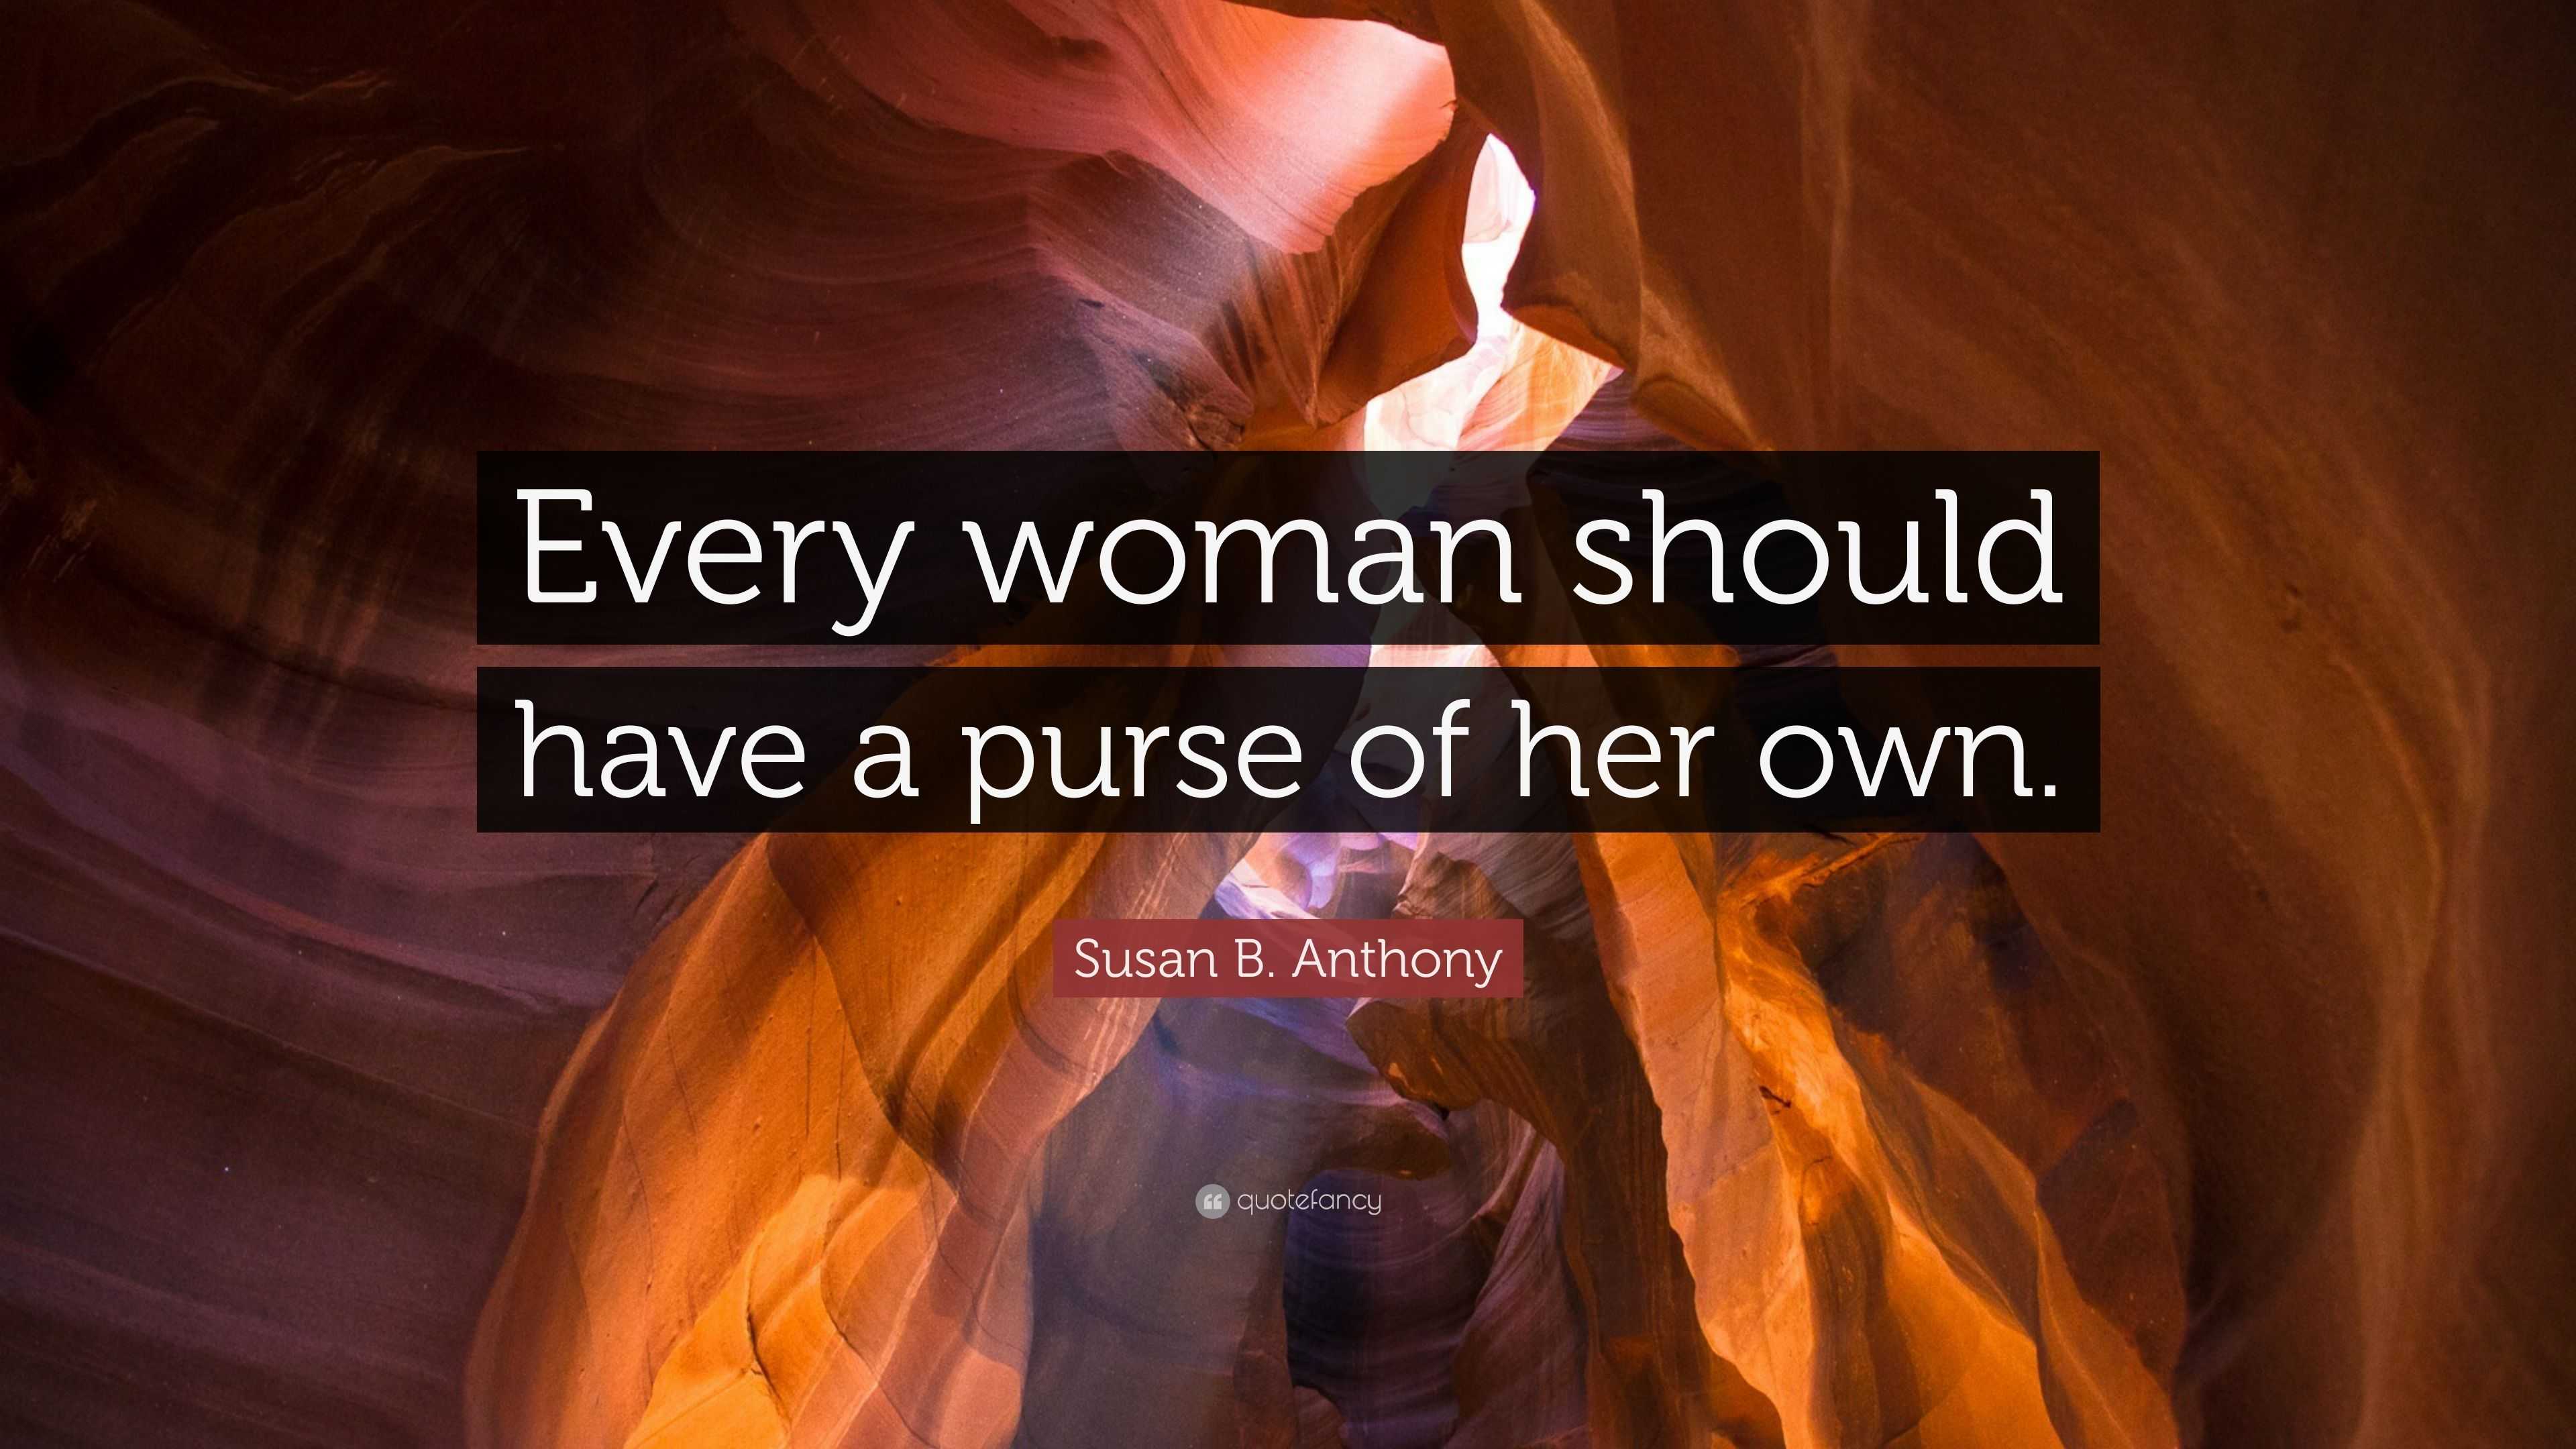 Woman must have a purse of her own.” Susan B. Anthony, 1853